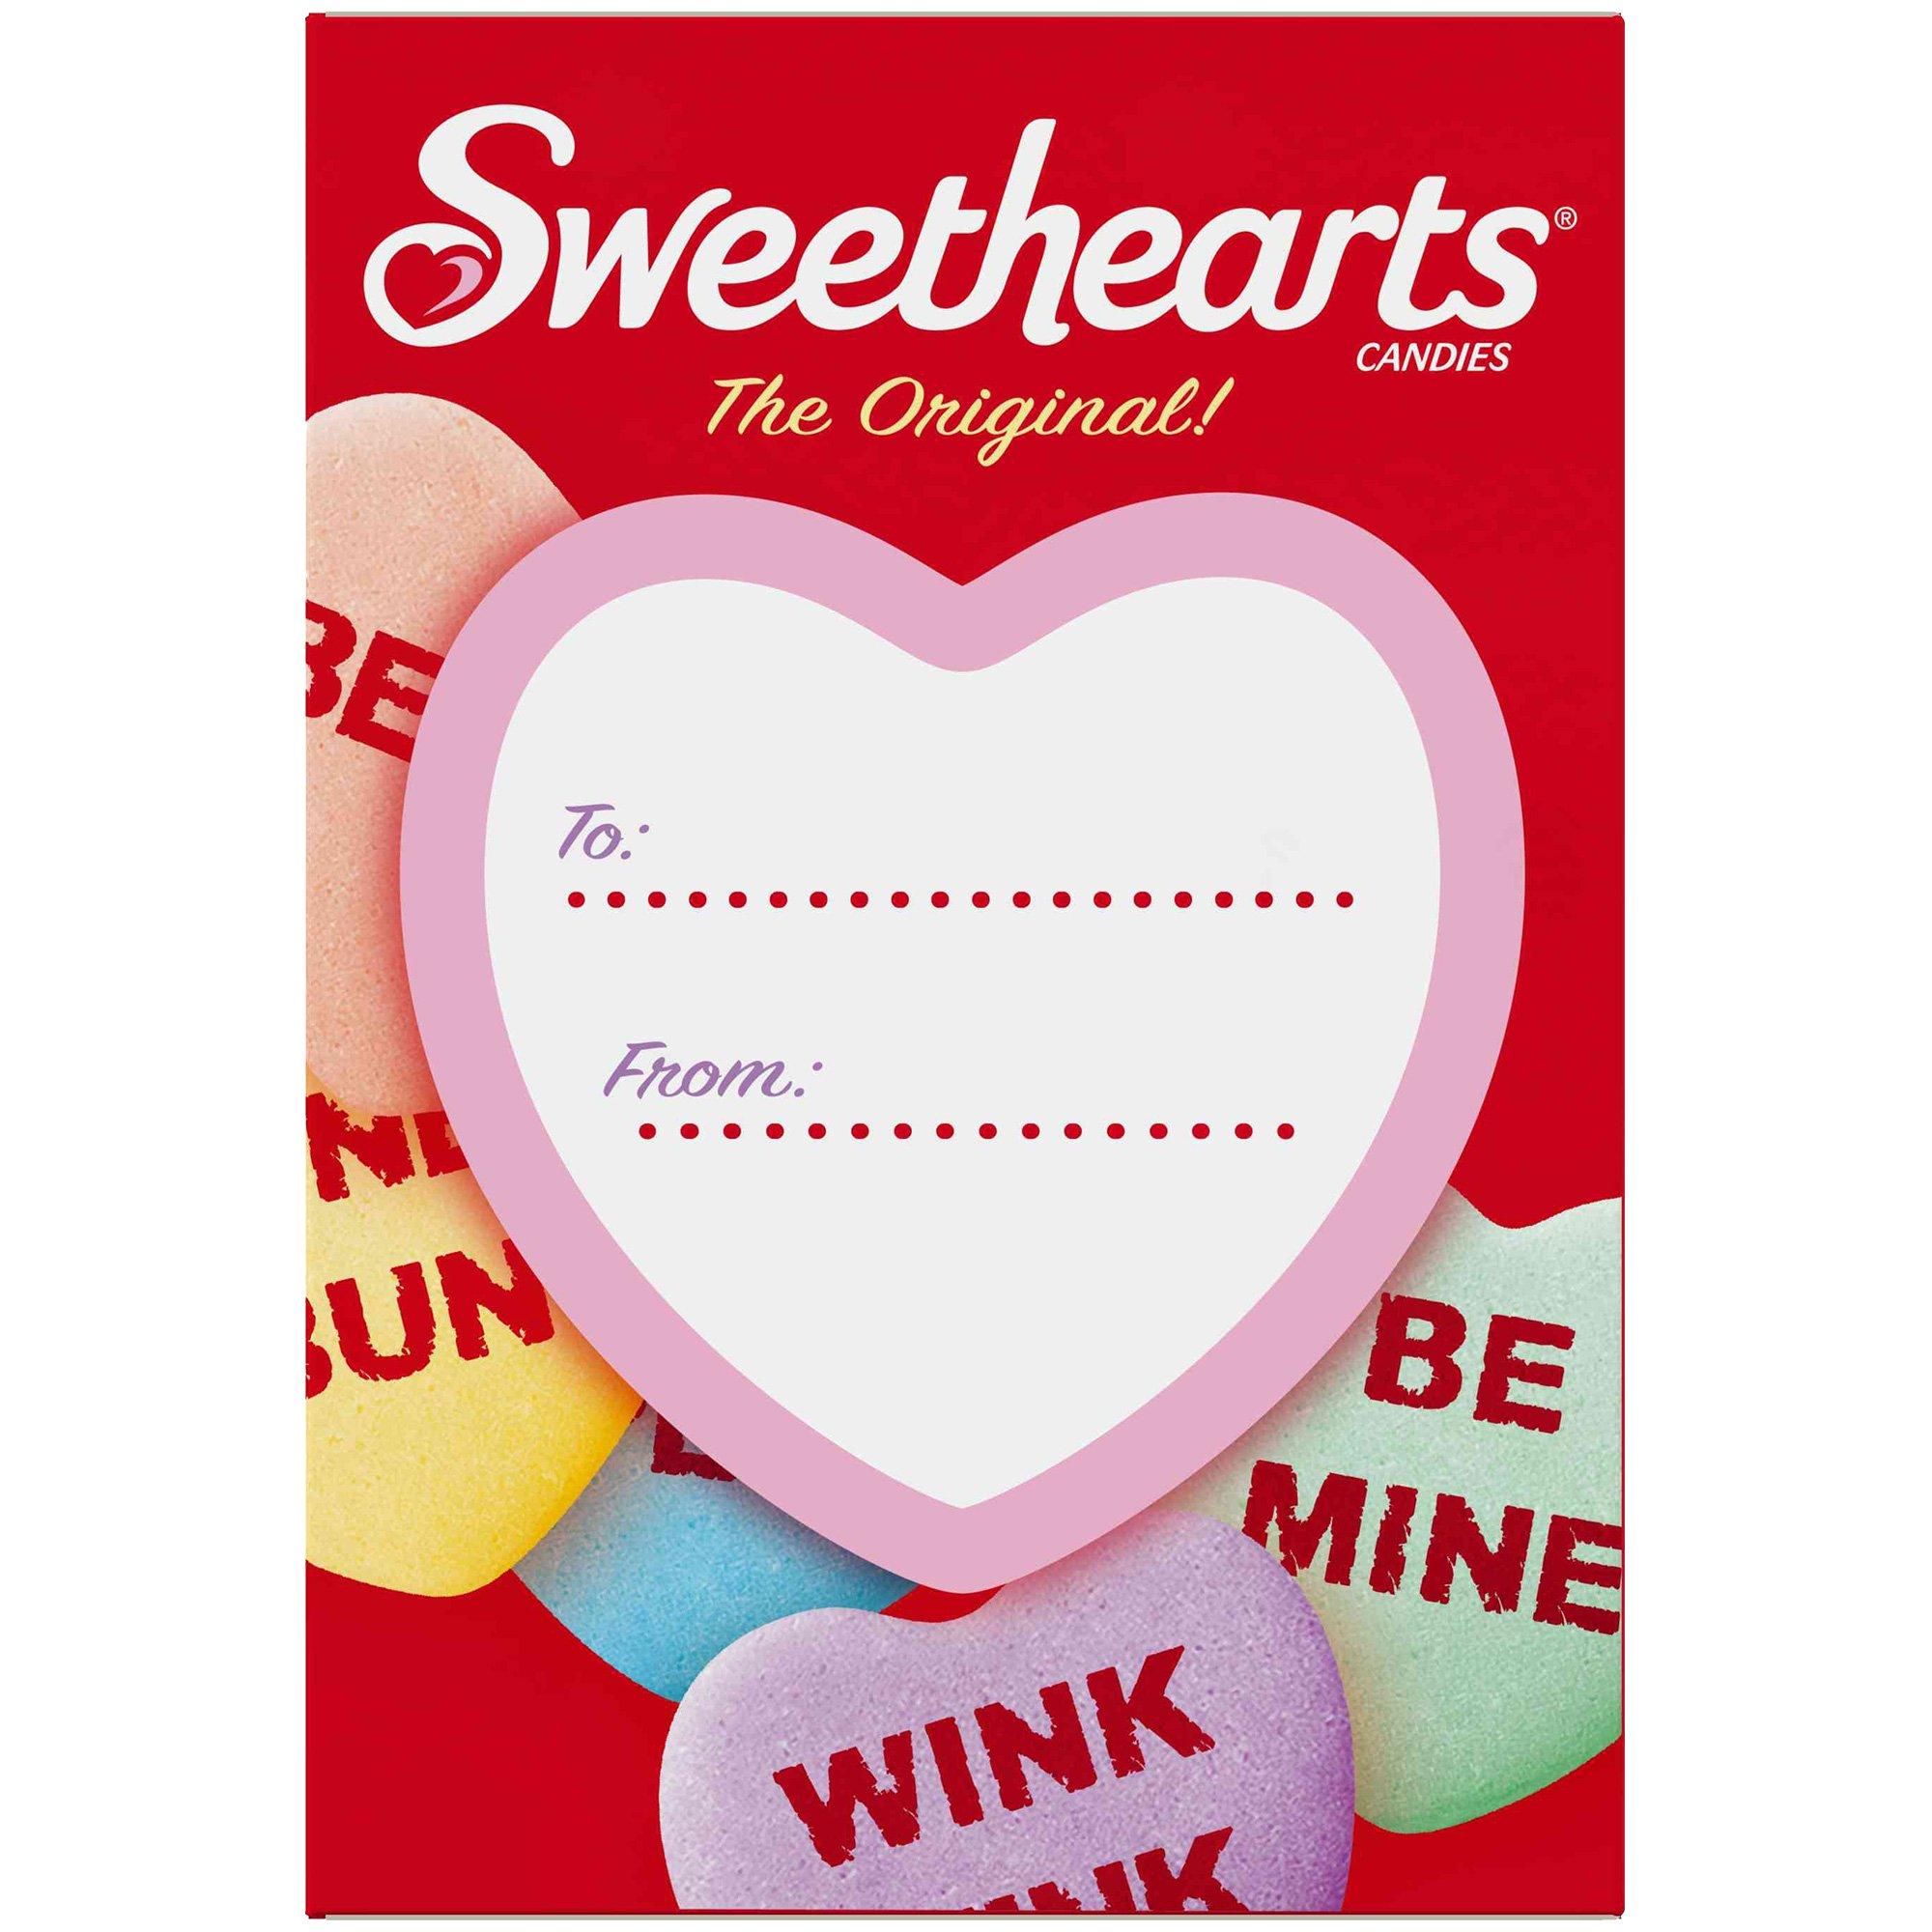 Brach's Tiny Classic Conversation Hearts Valentine's Candy Boxes, 0.75 oz,  5 Count 